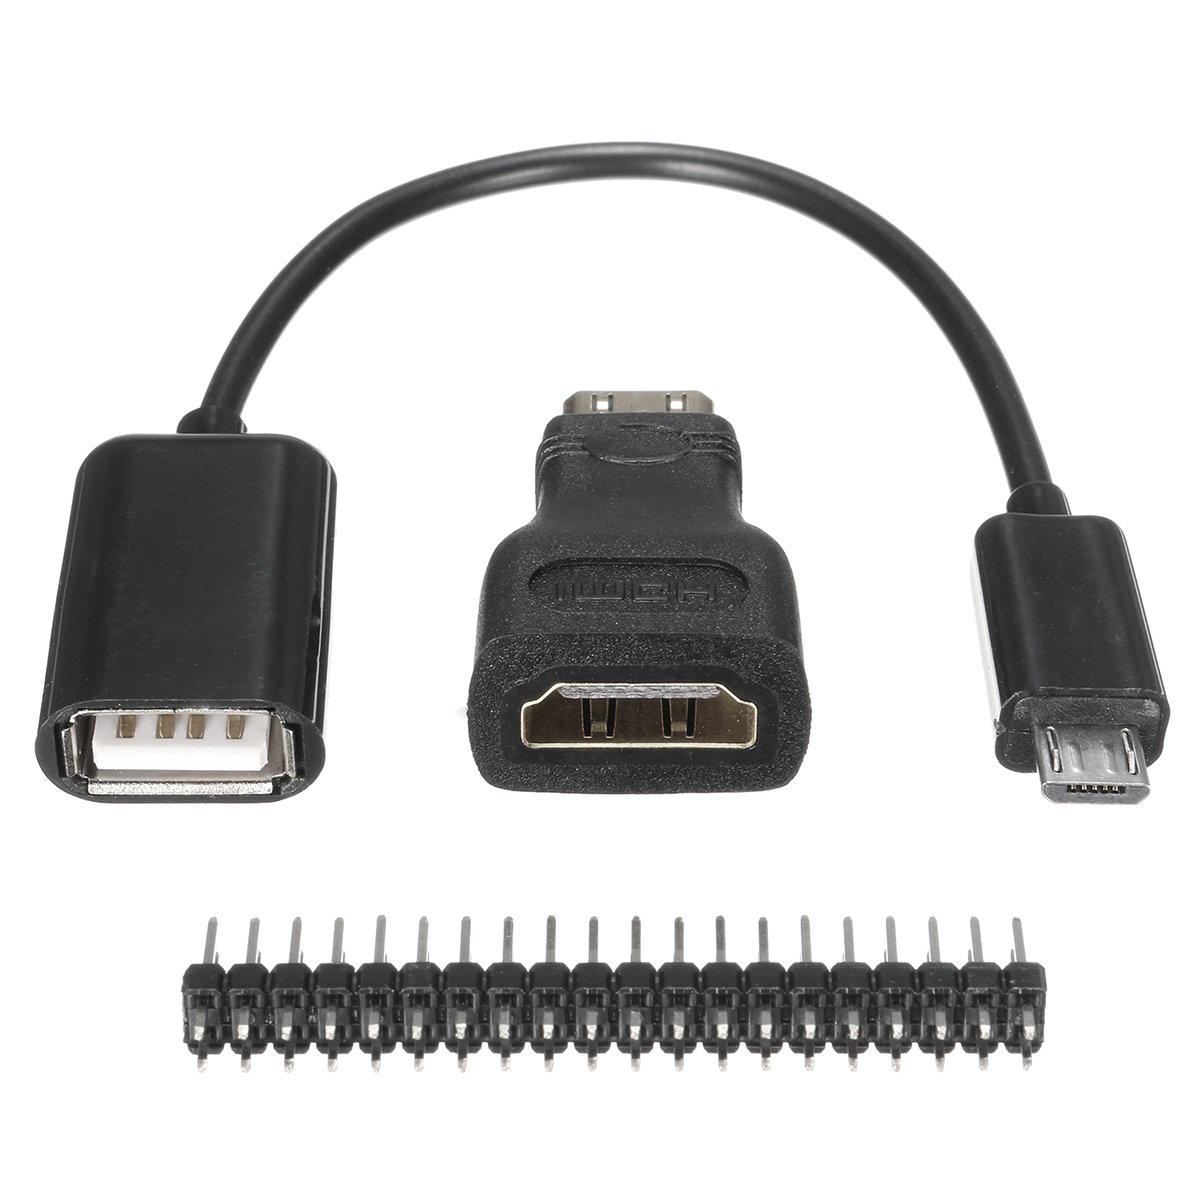 3 in 1 Mini HD to HD Adapter+Micro USB to USB Female Power Cable+40P Pin Kits For Raspberry Pi Zero 1